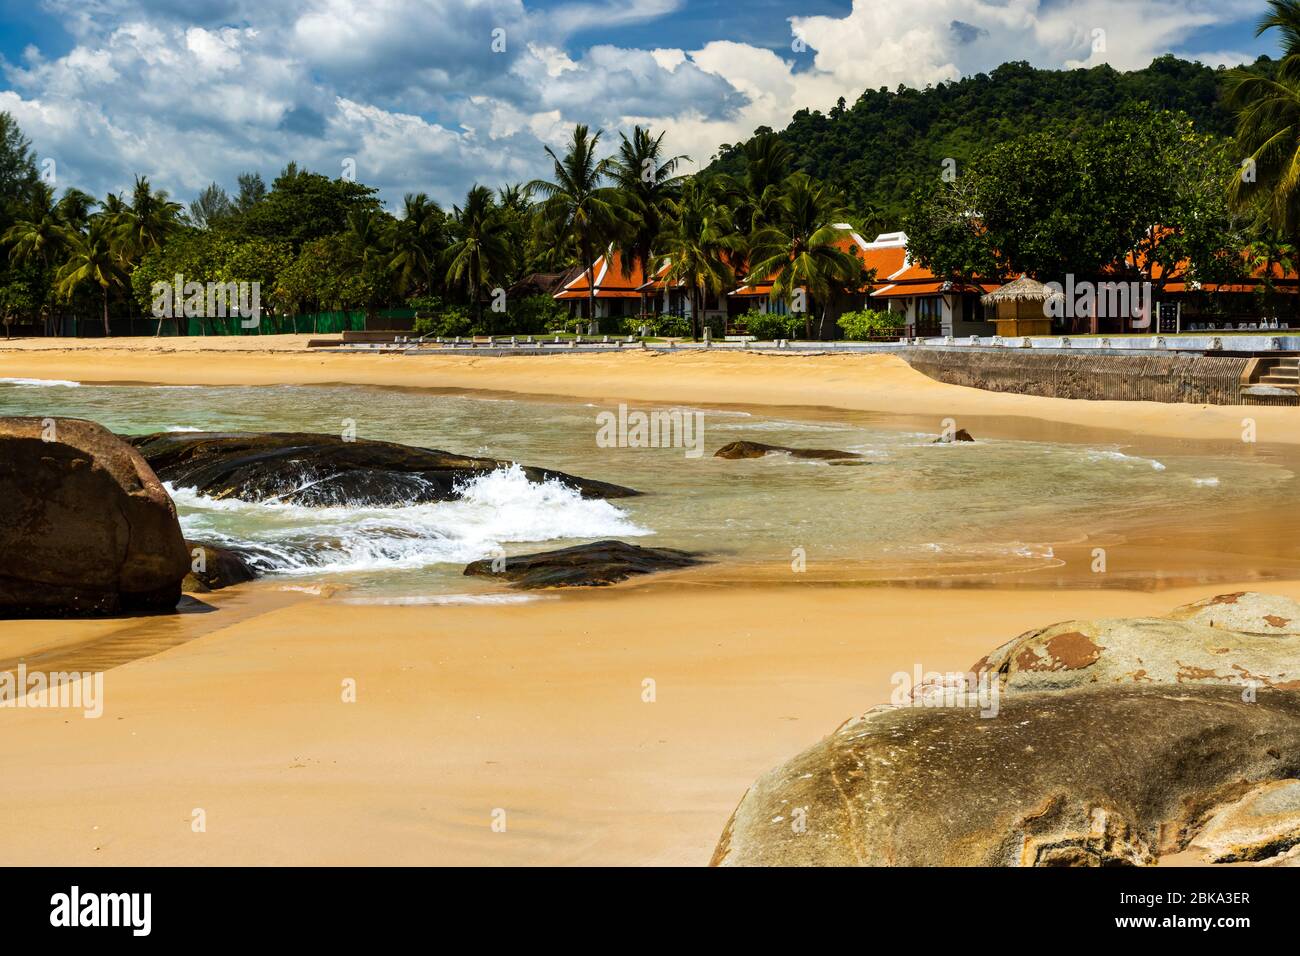 Closed resorts and a deserted tropical beache during the Covid-19 Coronavirus lockdown and travel ban. Stock Photo